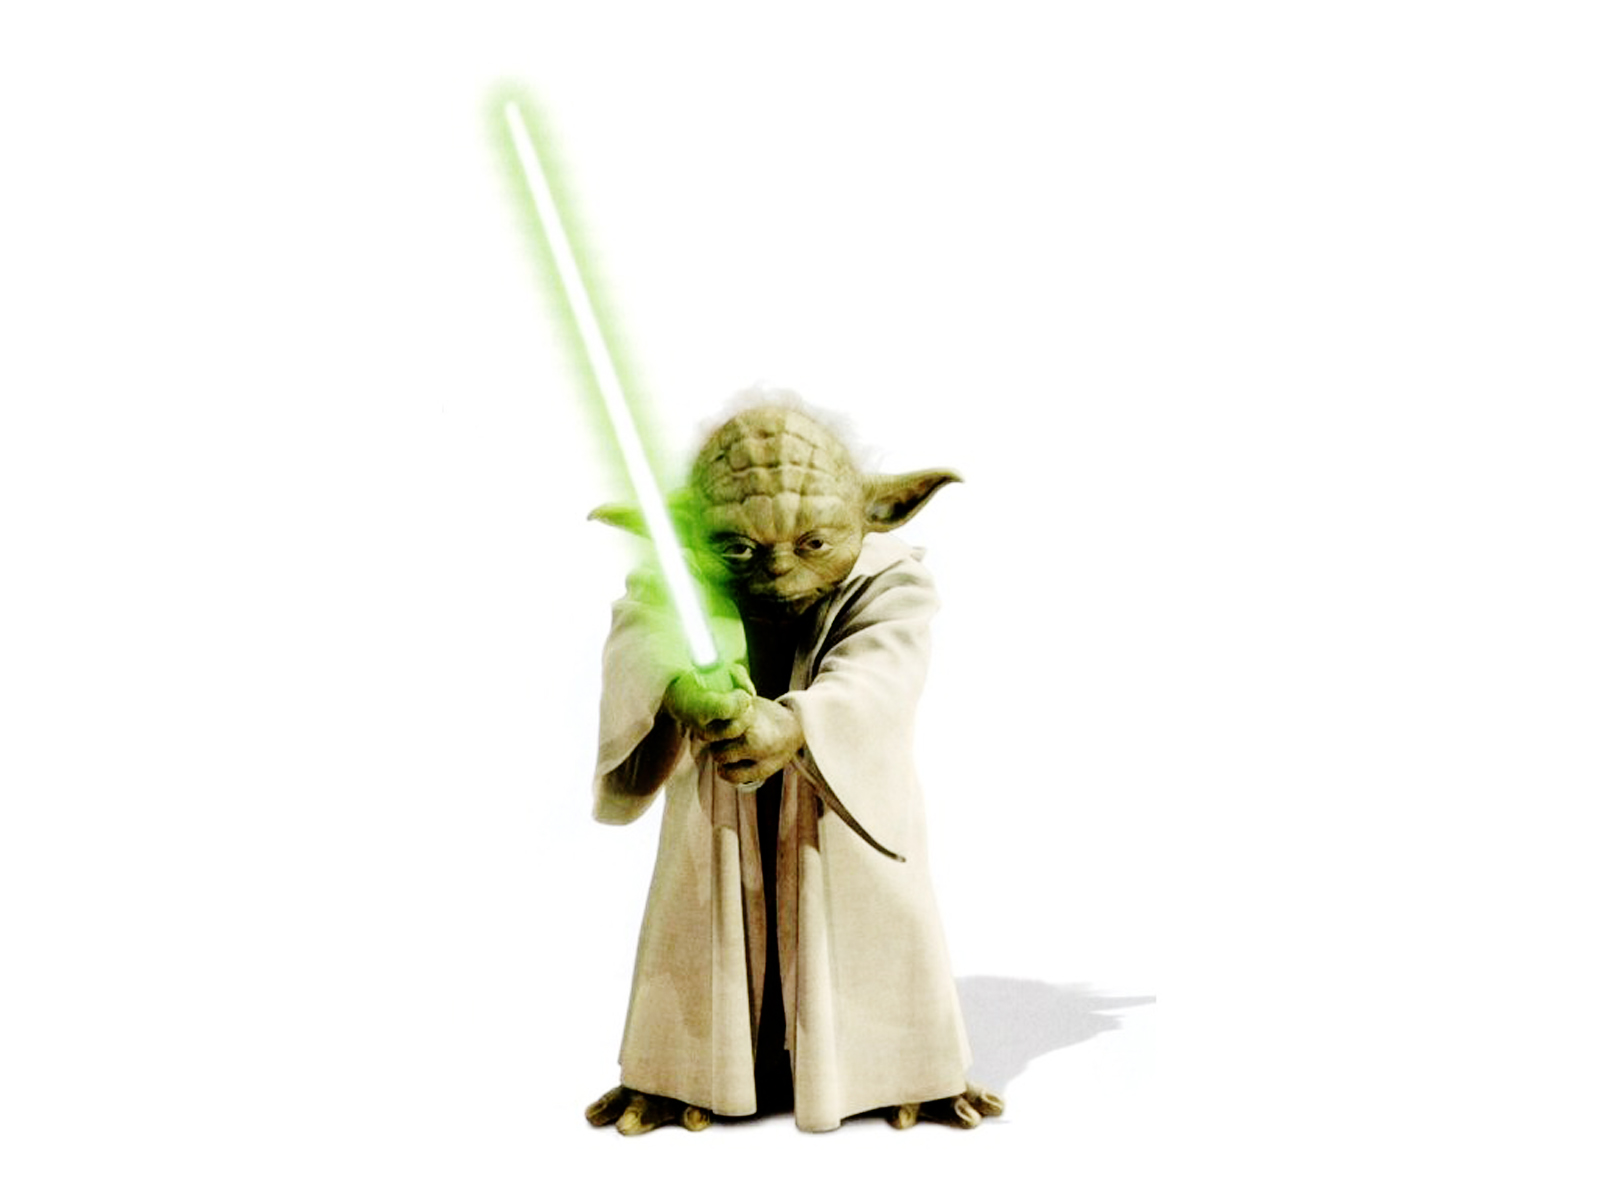 Master Yoda Star Wars HD Wallpapers HD Wallpapers Backgrounds 1600x1200